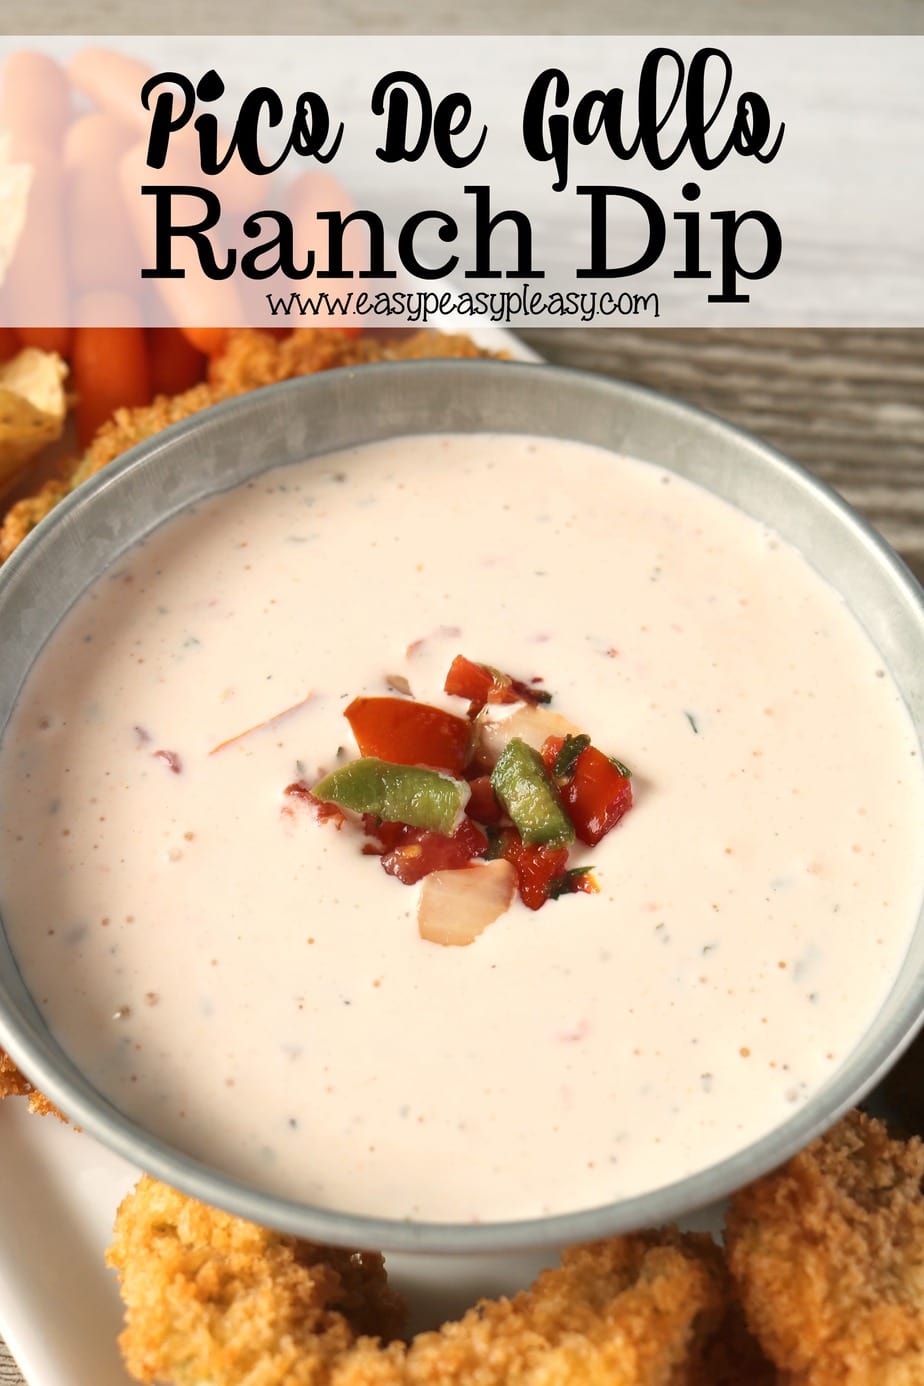 Liven up your delicious Ranch Dip with a few added ingredients. All you need is some store bought Pico De Gallo and some hot sauce. Check out this easy recipe.